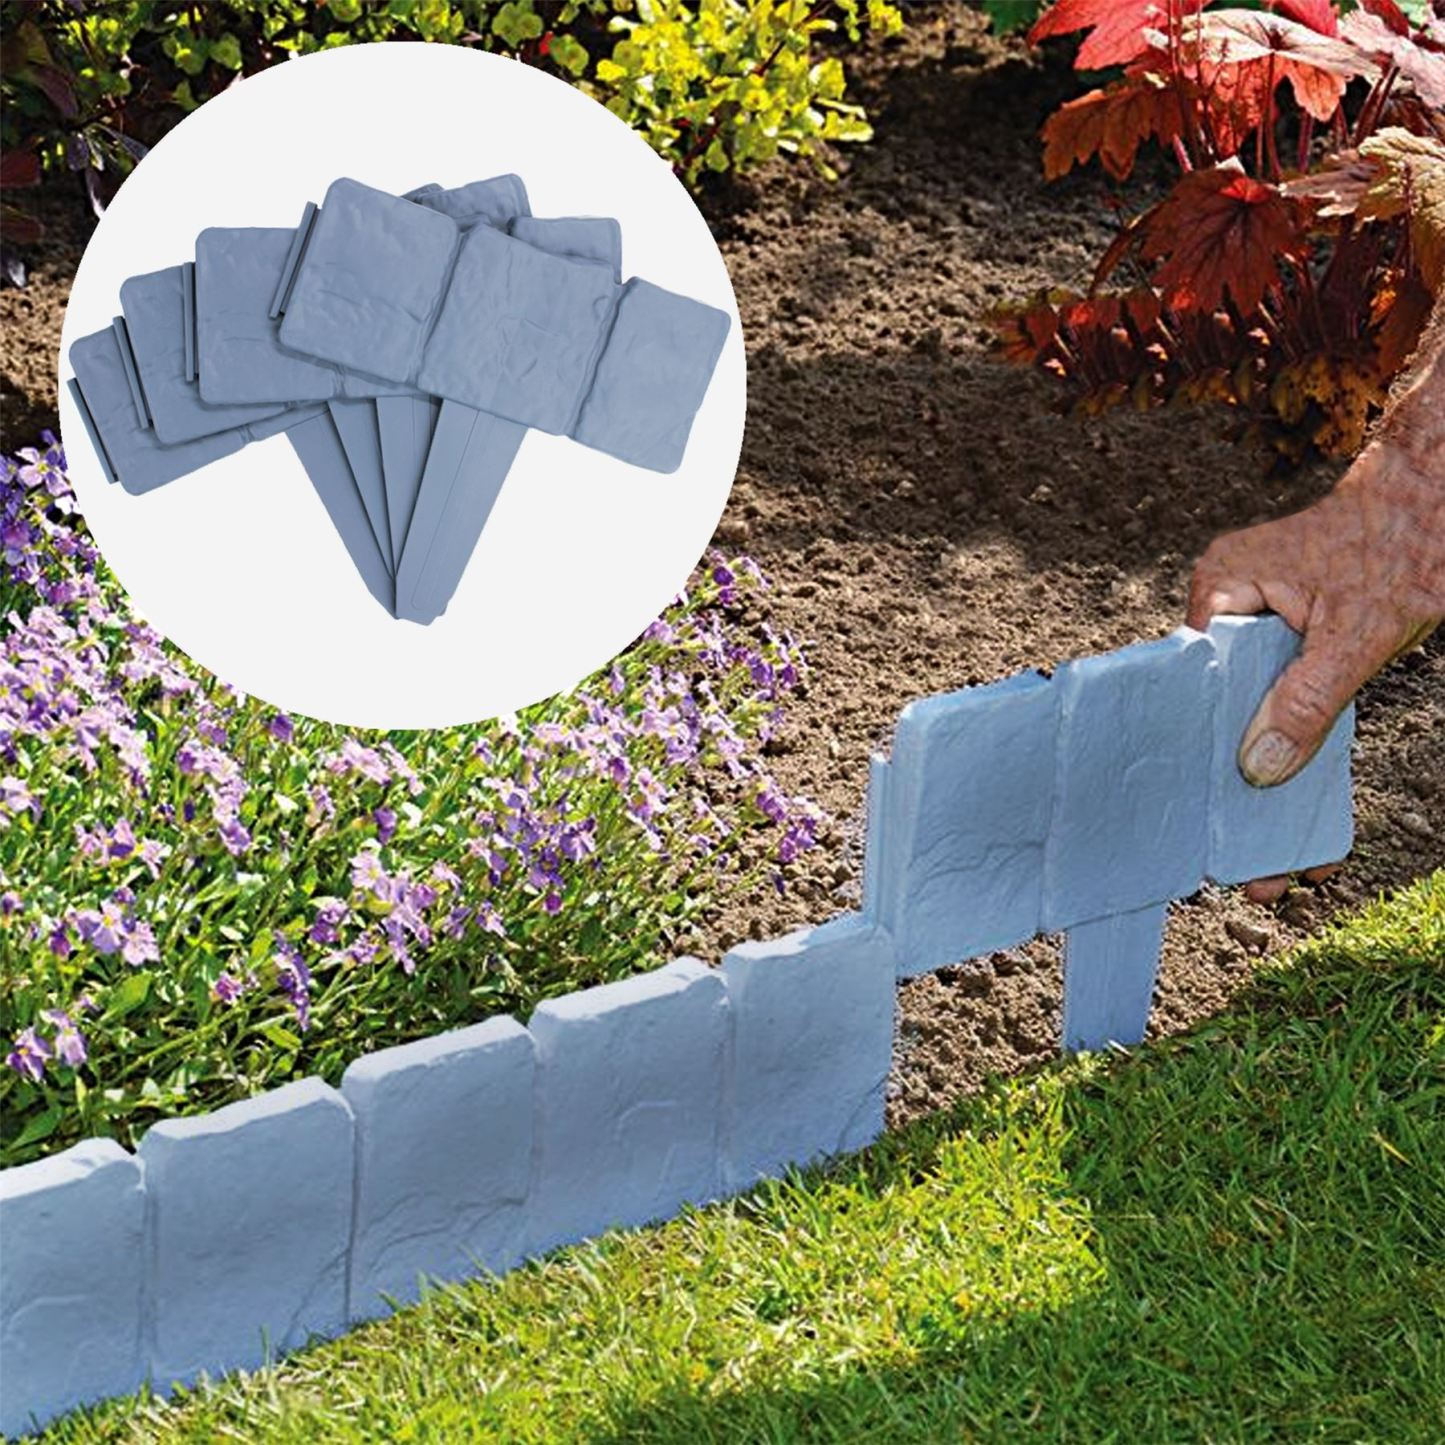 Stone Effect Lawn Edging Livid Grey 10M - Pack of 40 | Pukkr